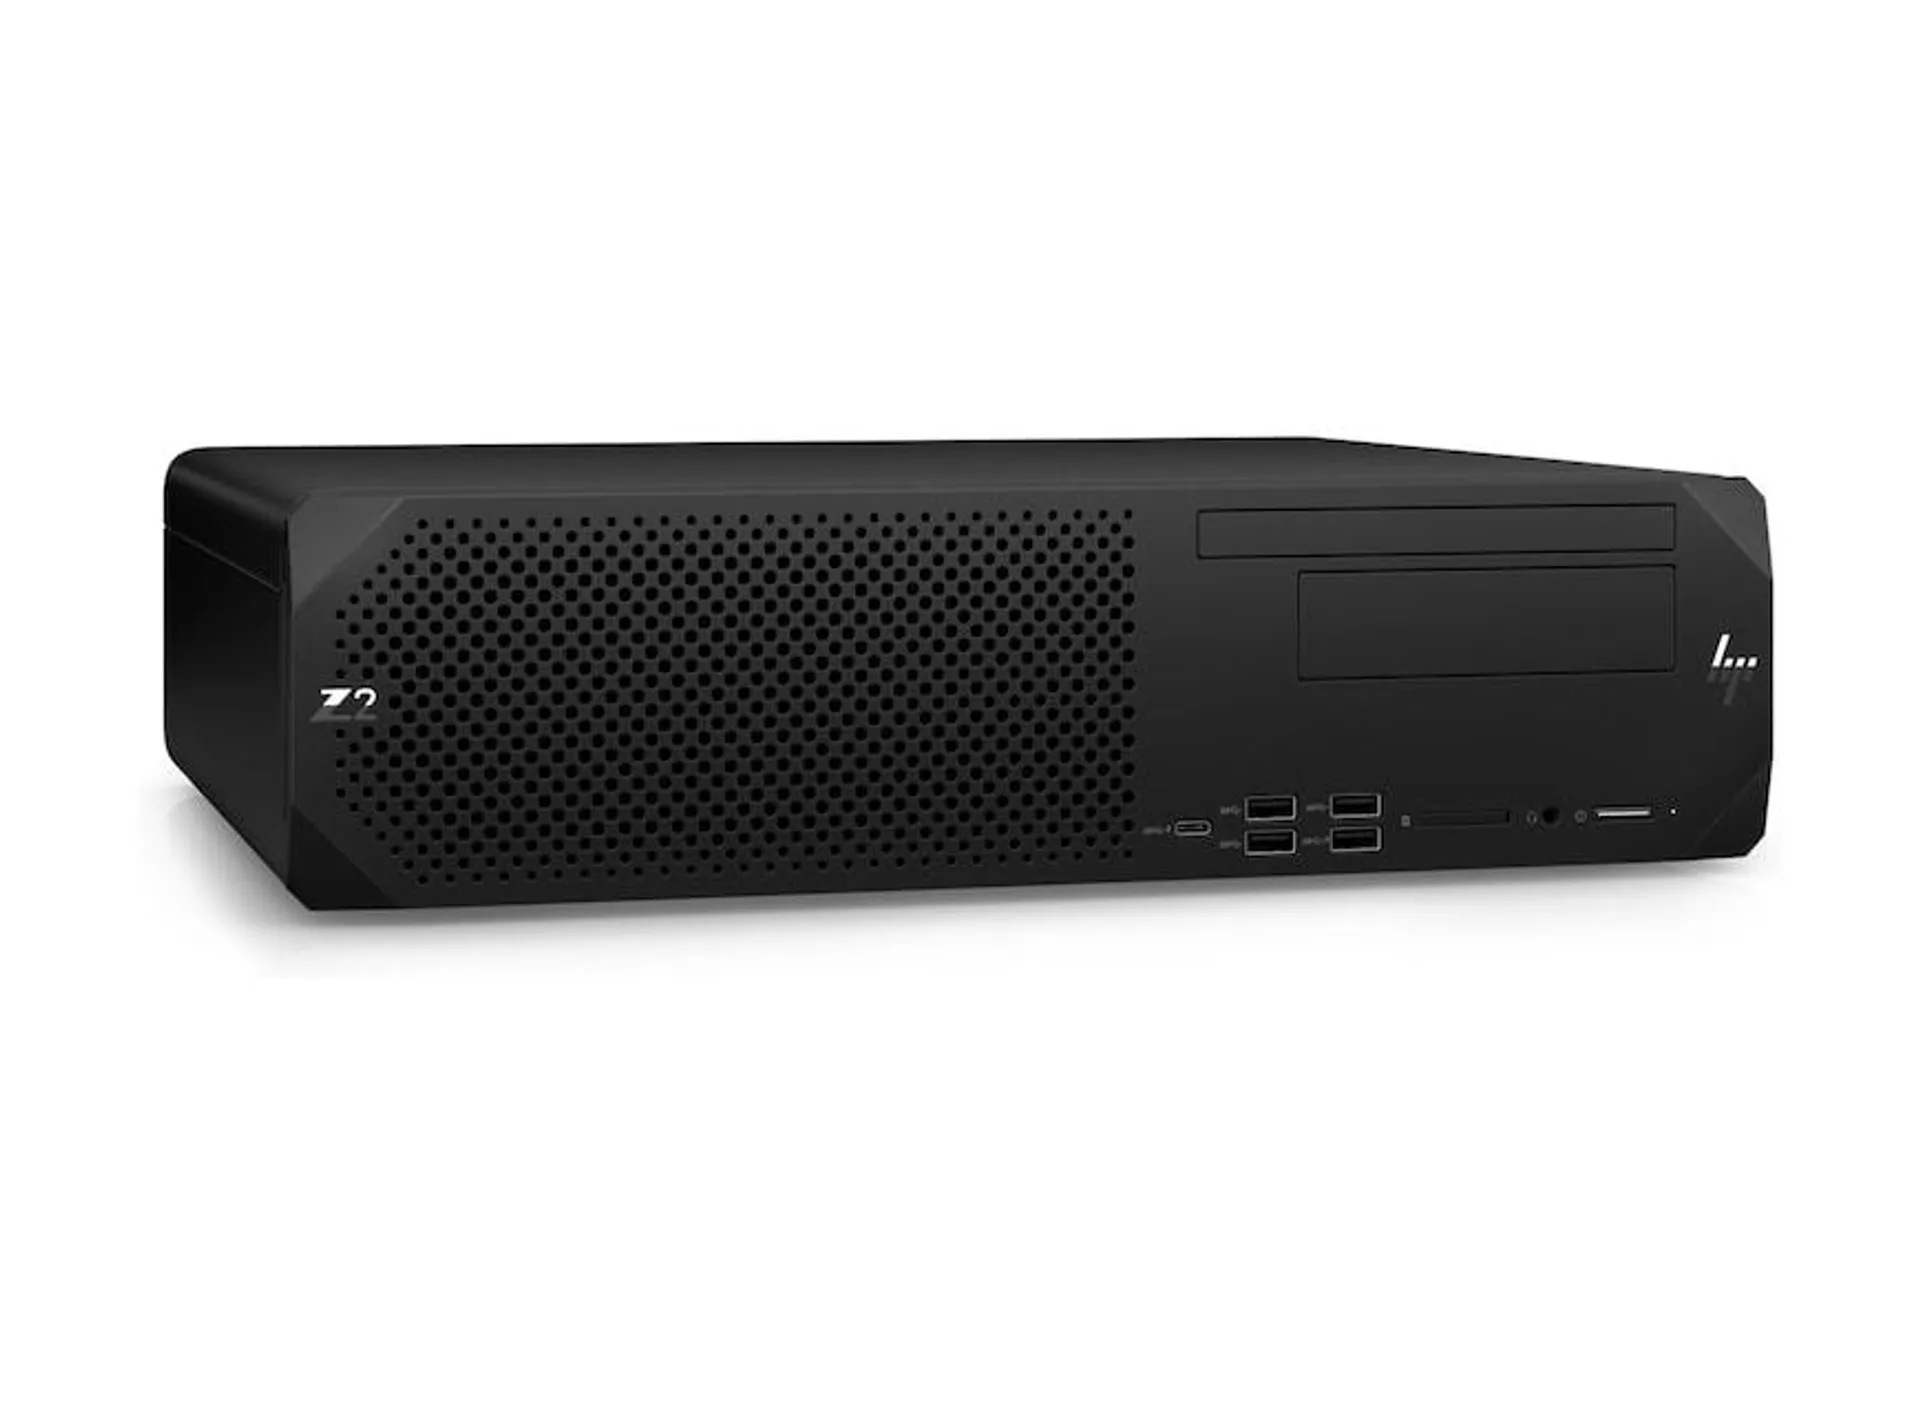 HP Z2 G9 Small Form Factor Workstation – Core™ i7 & NVIDIA® T1000